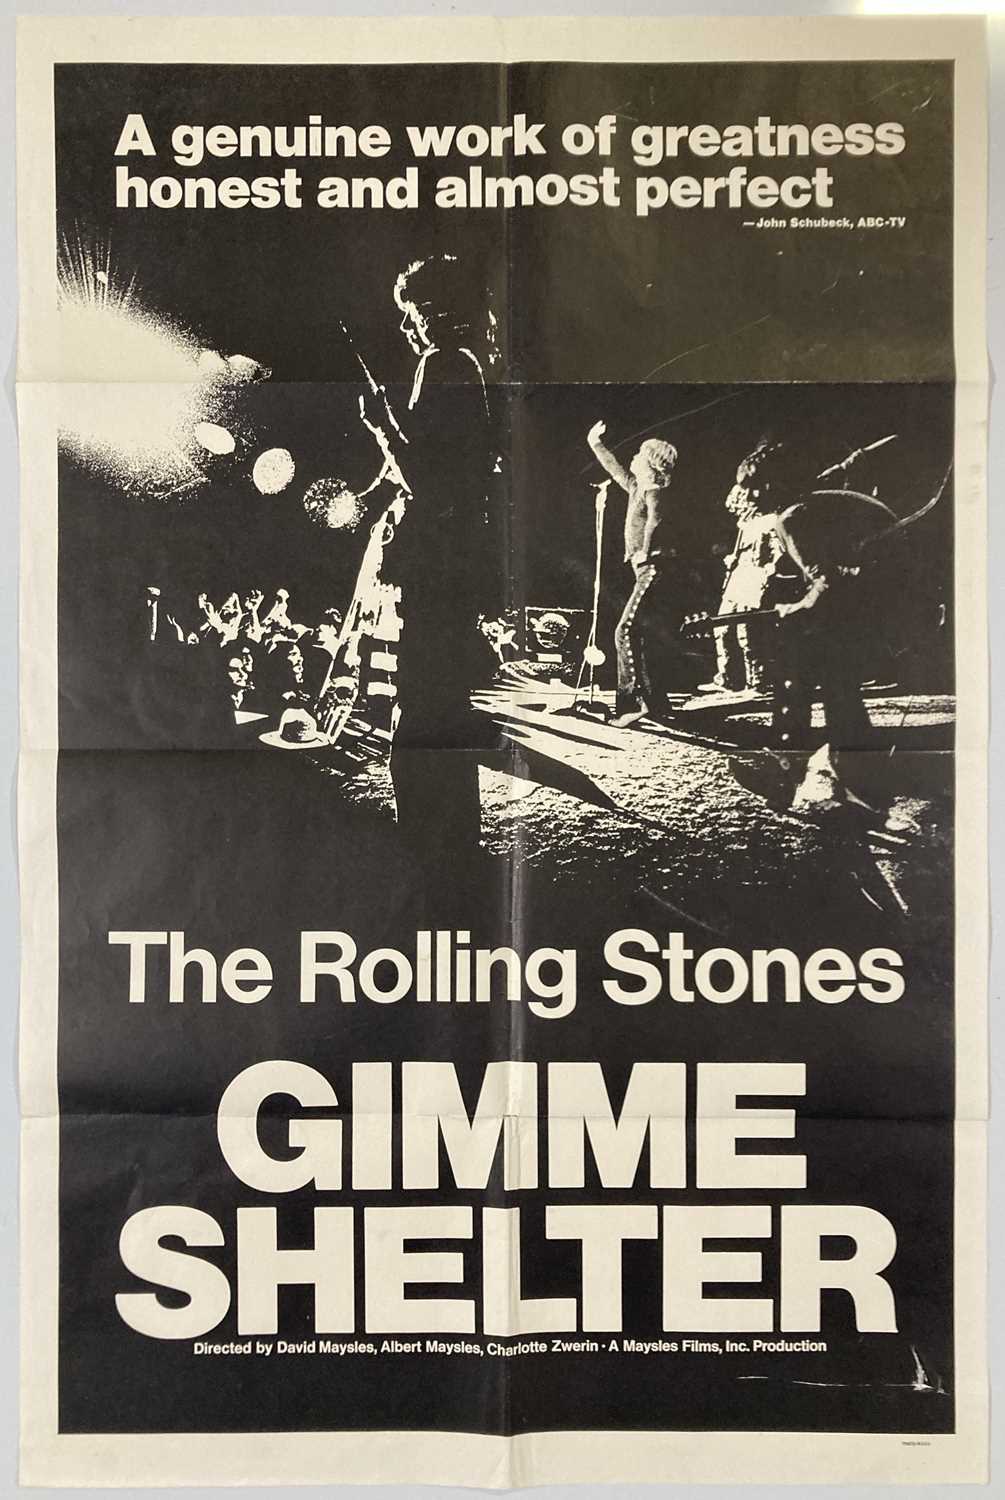 THE ROLLING STONES - GIMME SHELTER (1970) ORIGINAL US ONE-SHEET POSTER.